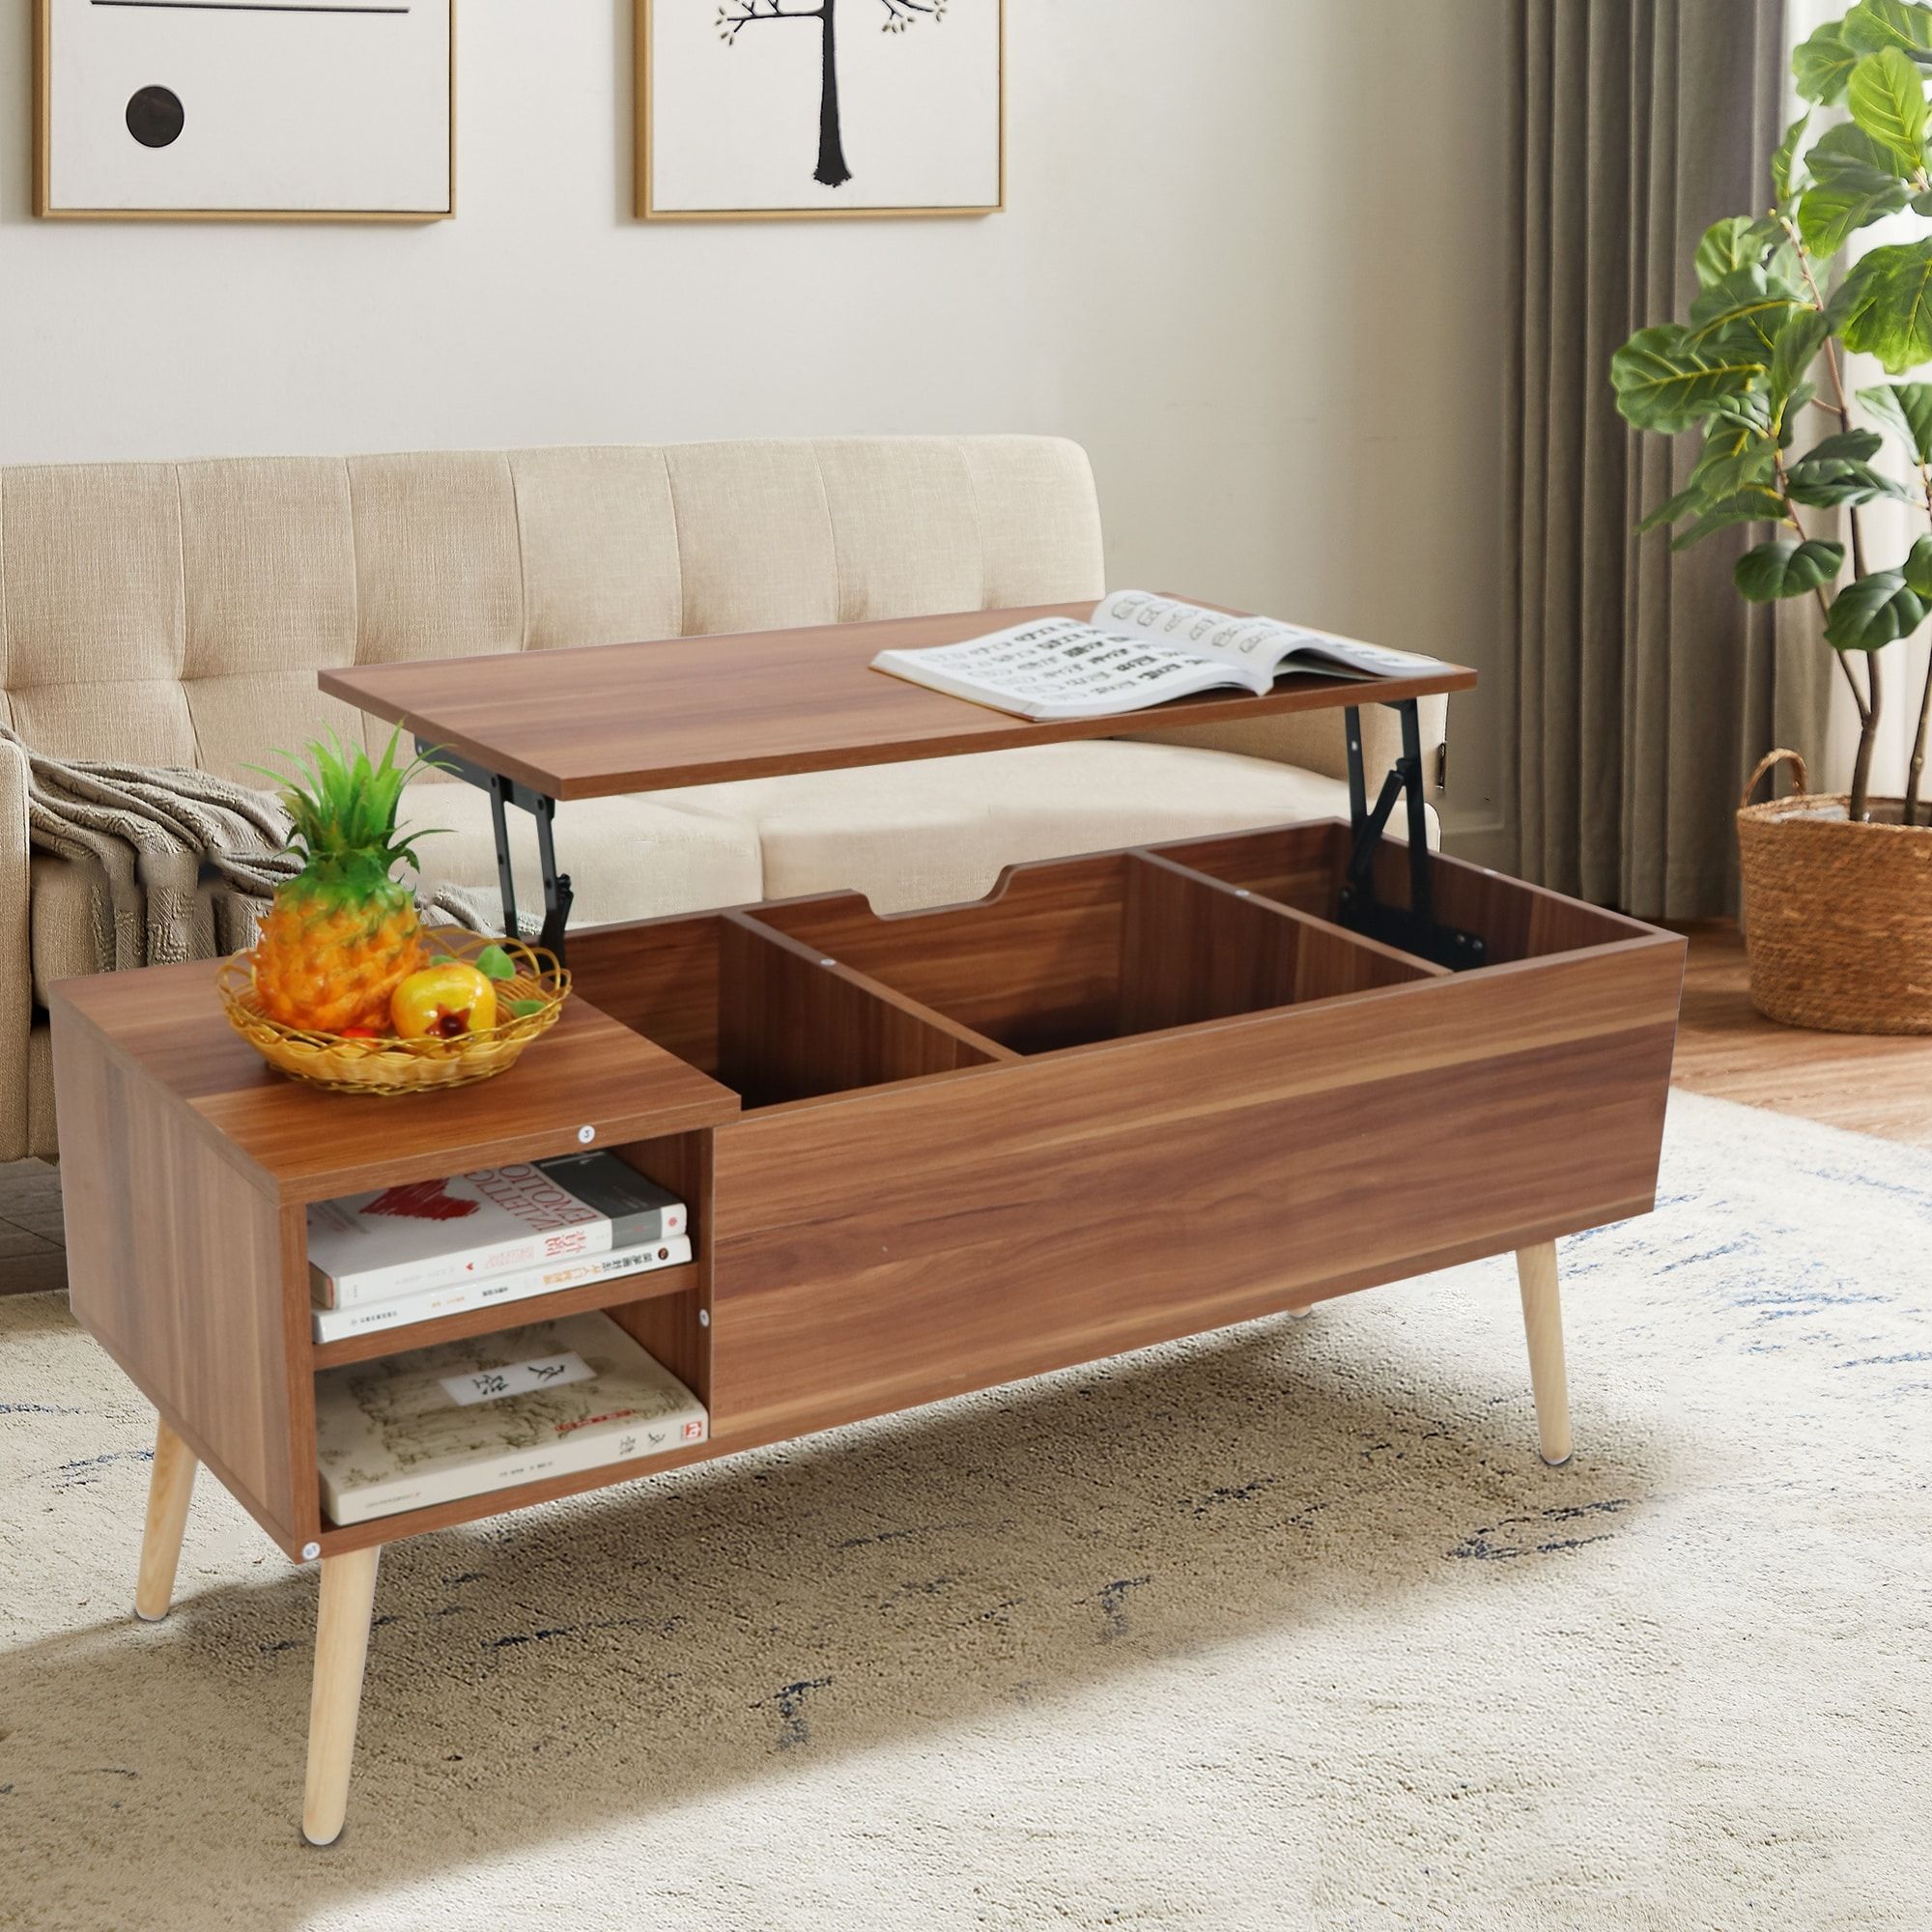 43" Lift Top Coffee Table With Hidden Storage Compartment And Open Shelves  – Bed Bath & Beyond – 36092425 Regarding Modern Coffee Tables With Hidden Storage Compartments (View 15 of 15)